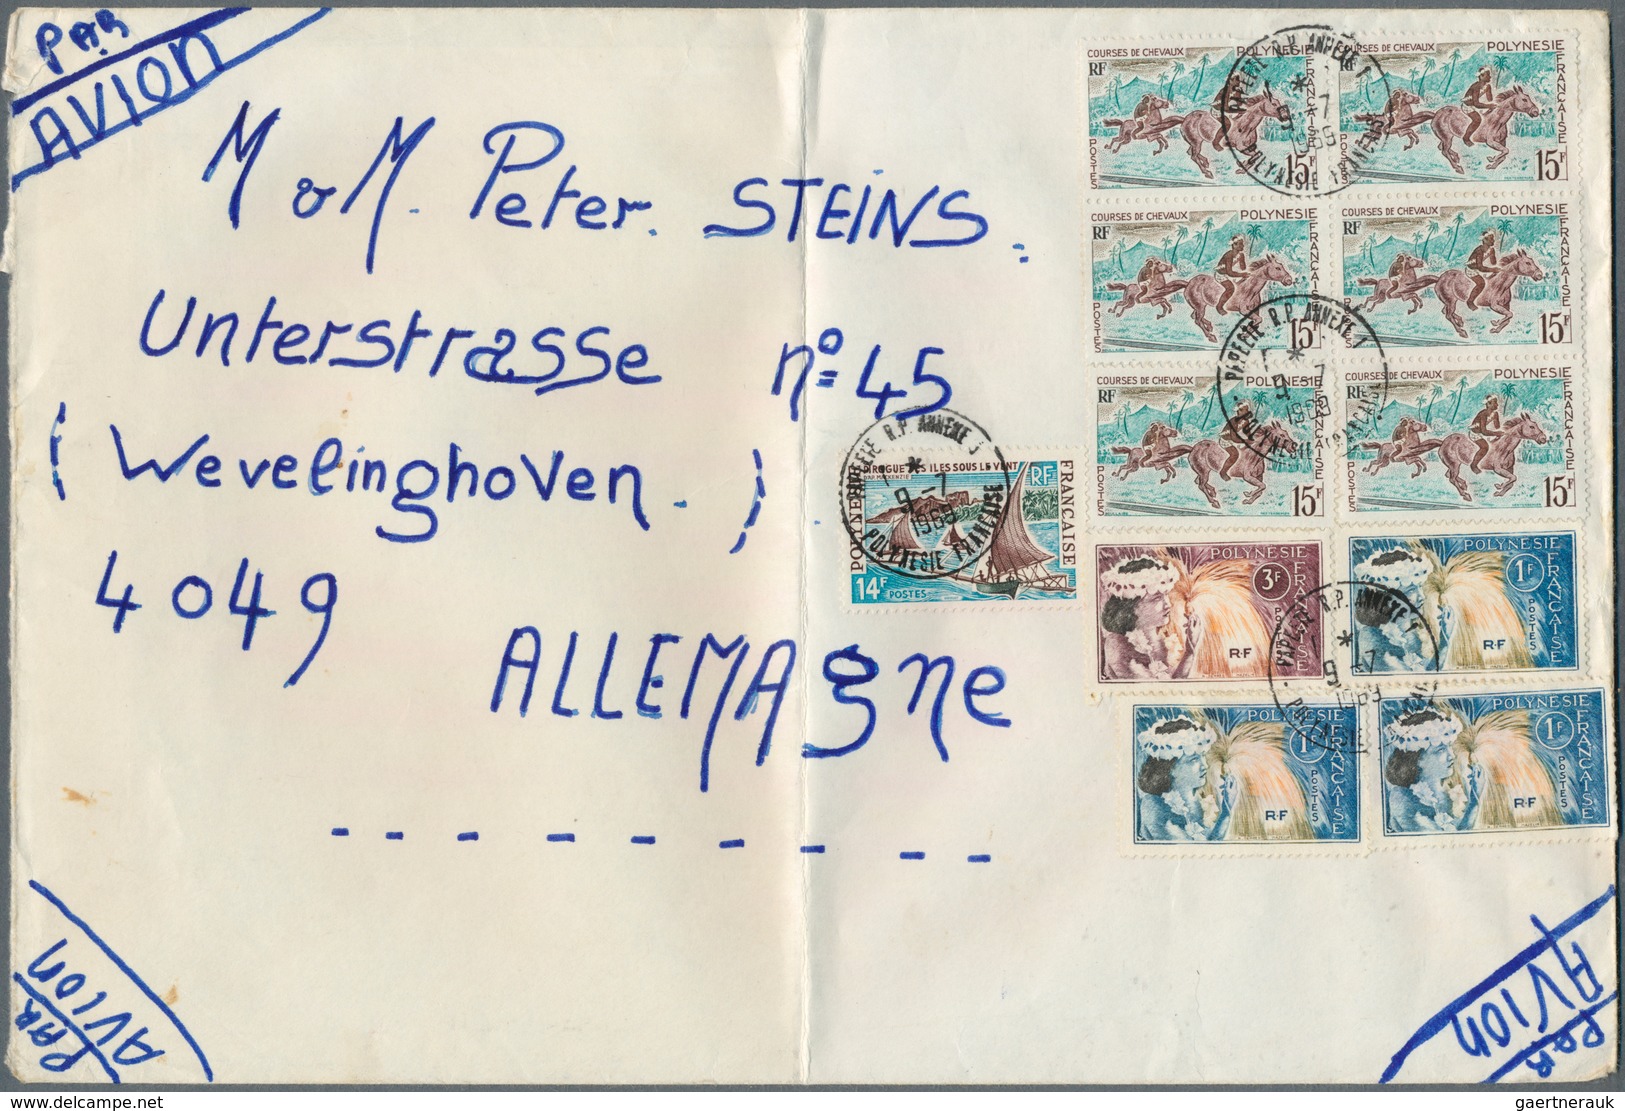 22588 Französisch-Polynesien: 1962/2000 (ca.), accumulation of apprx. 170 covers/cards with many attractiv